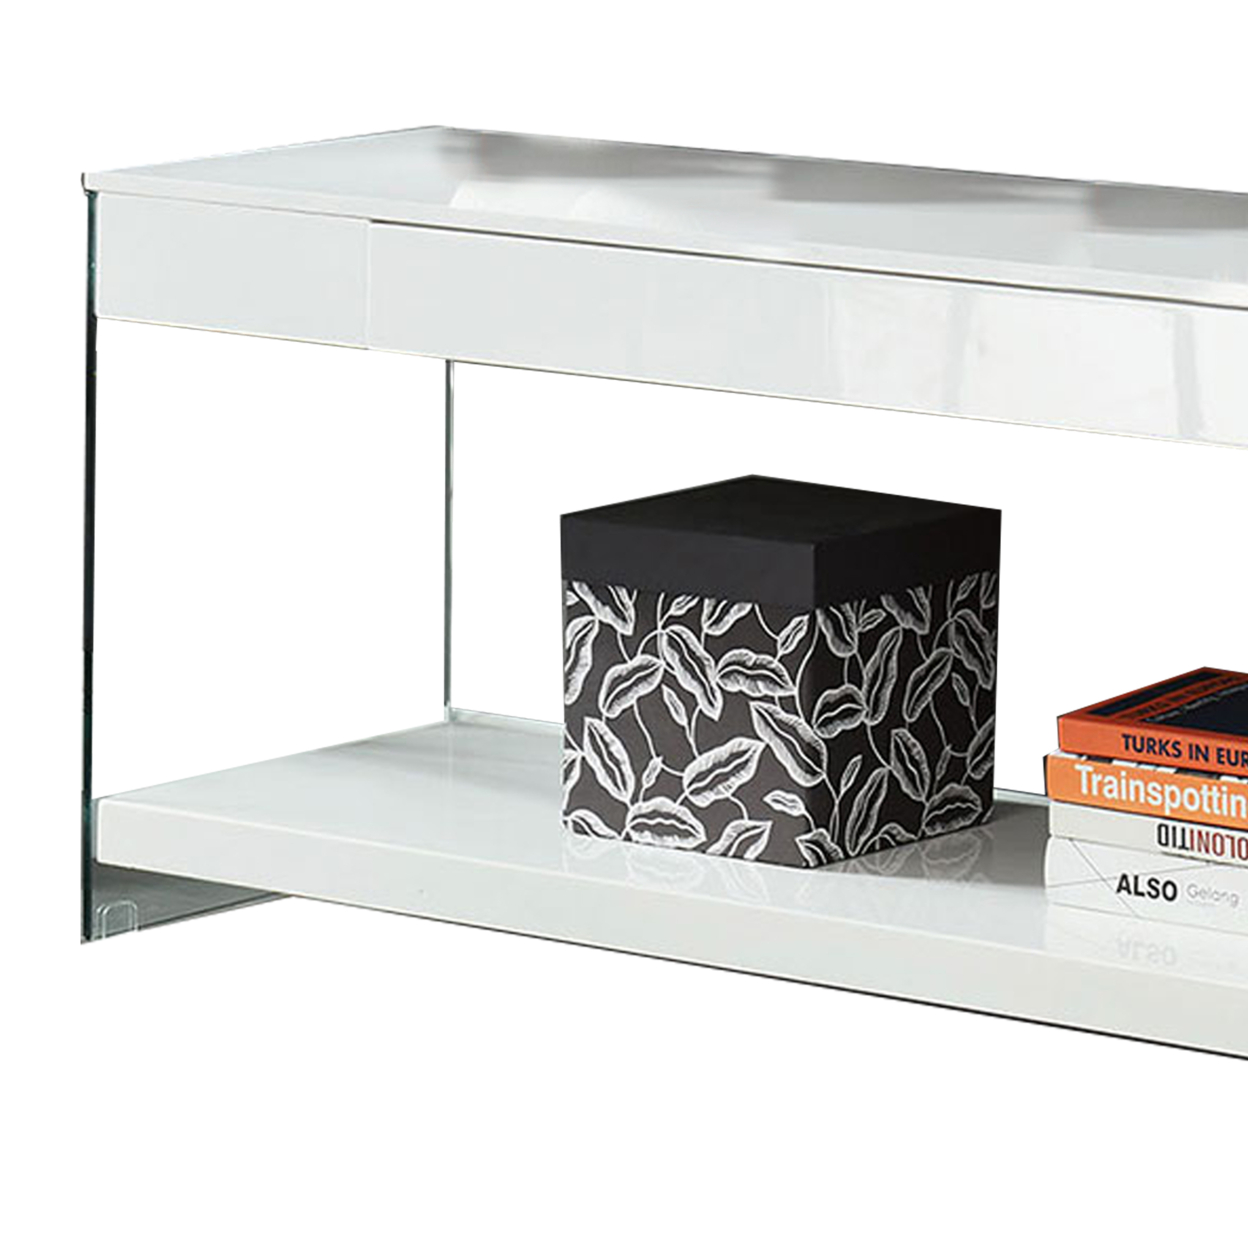 Wood And Glass TV Stand With Two Drawers, White- Saltoro Sherpi